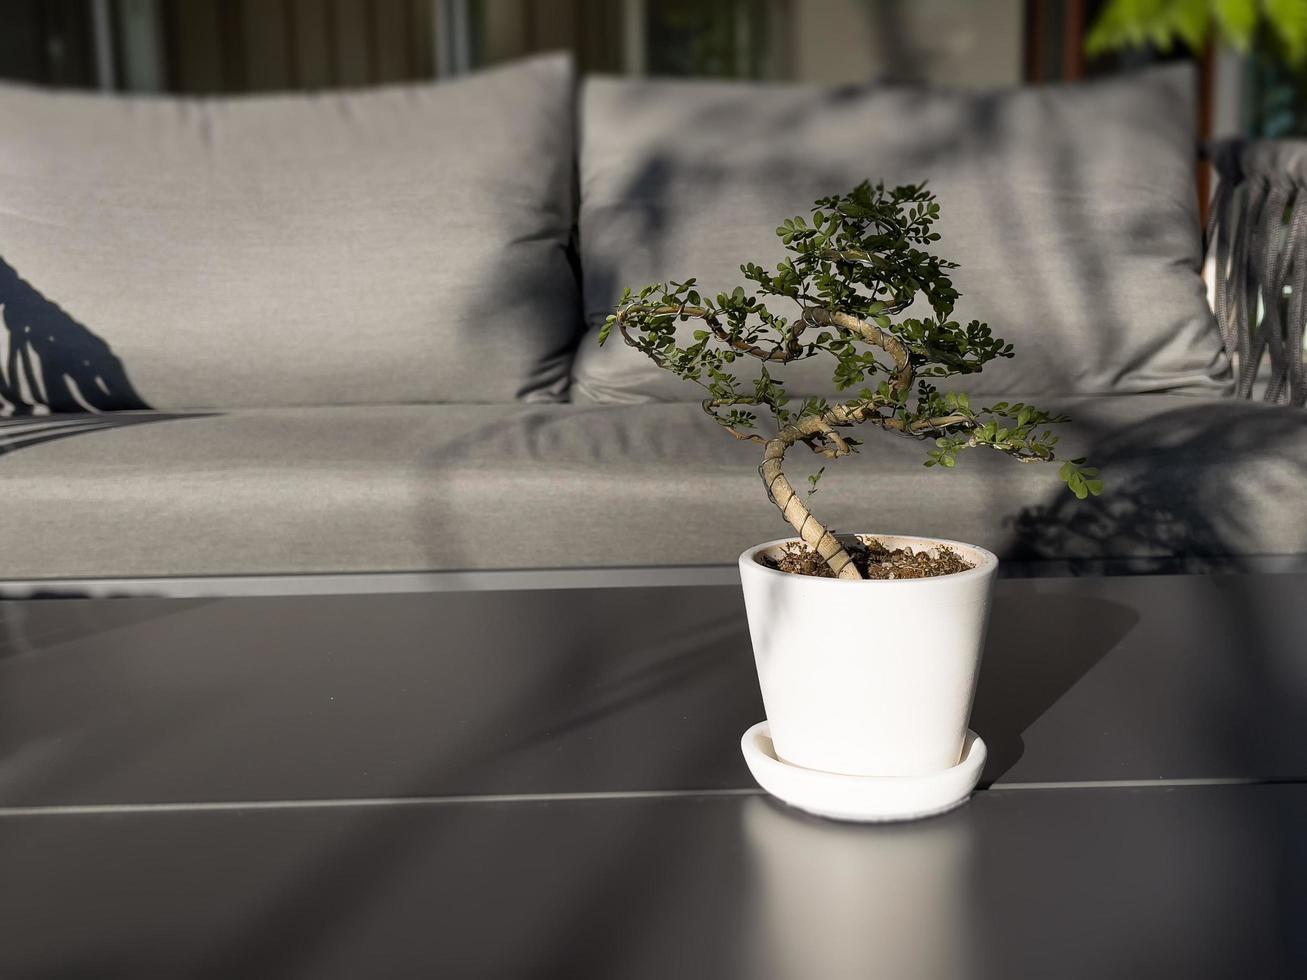 Table of free space with green plant photo